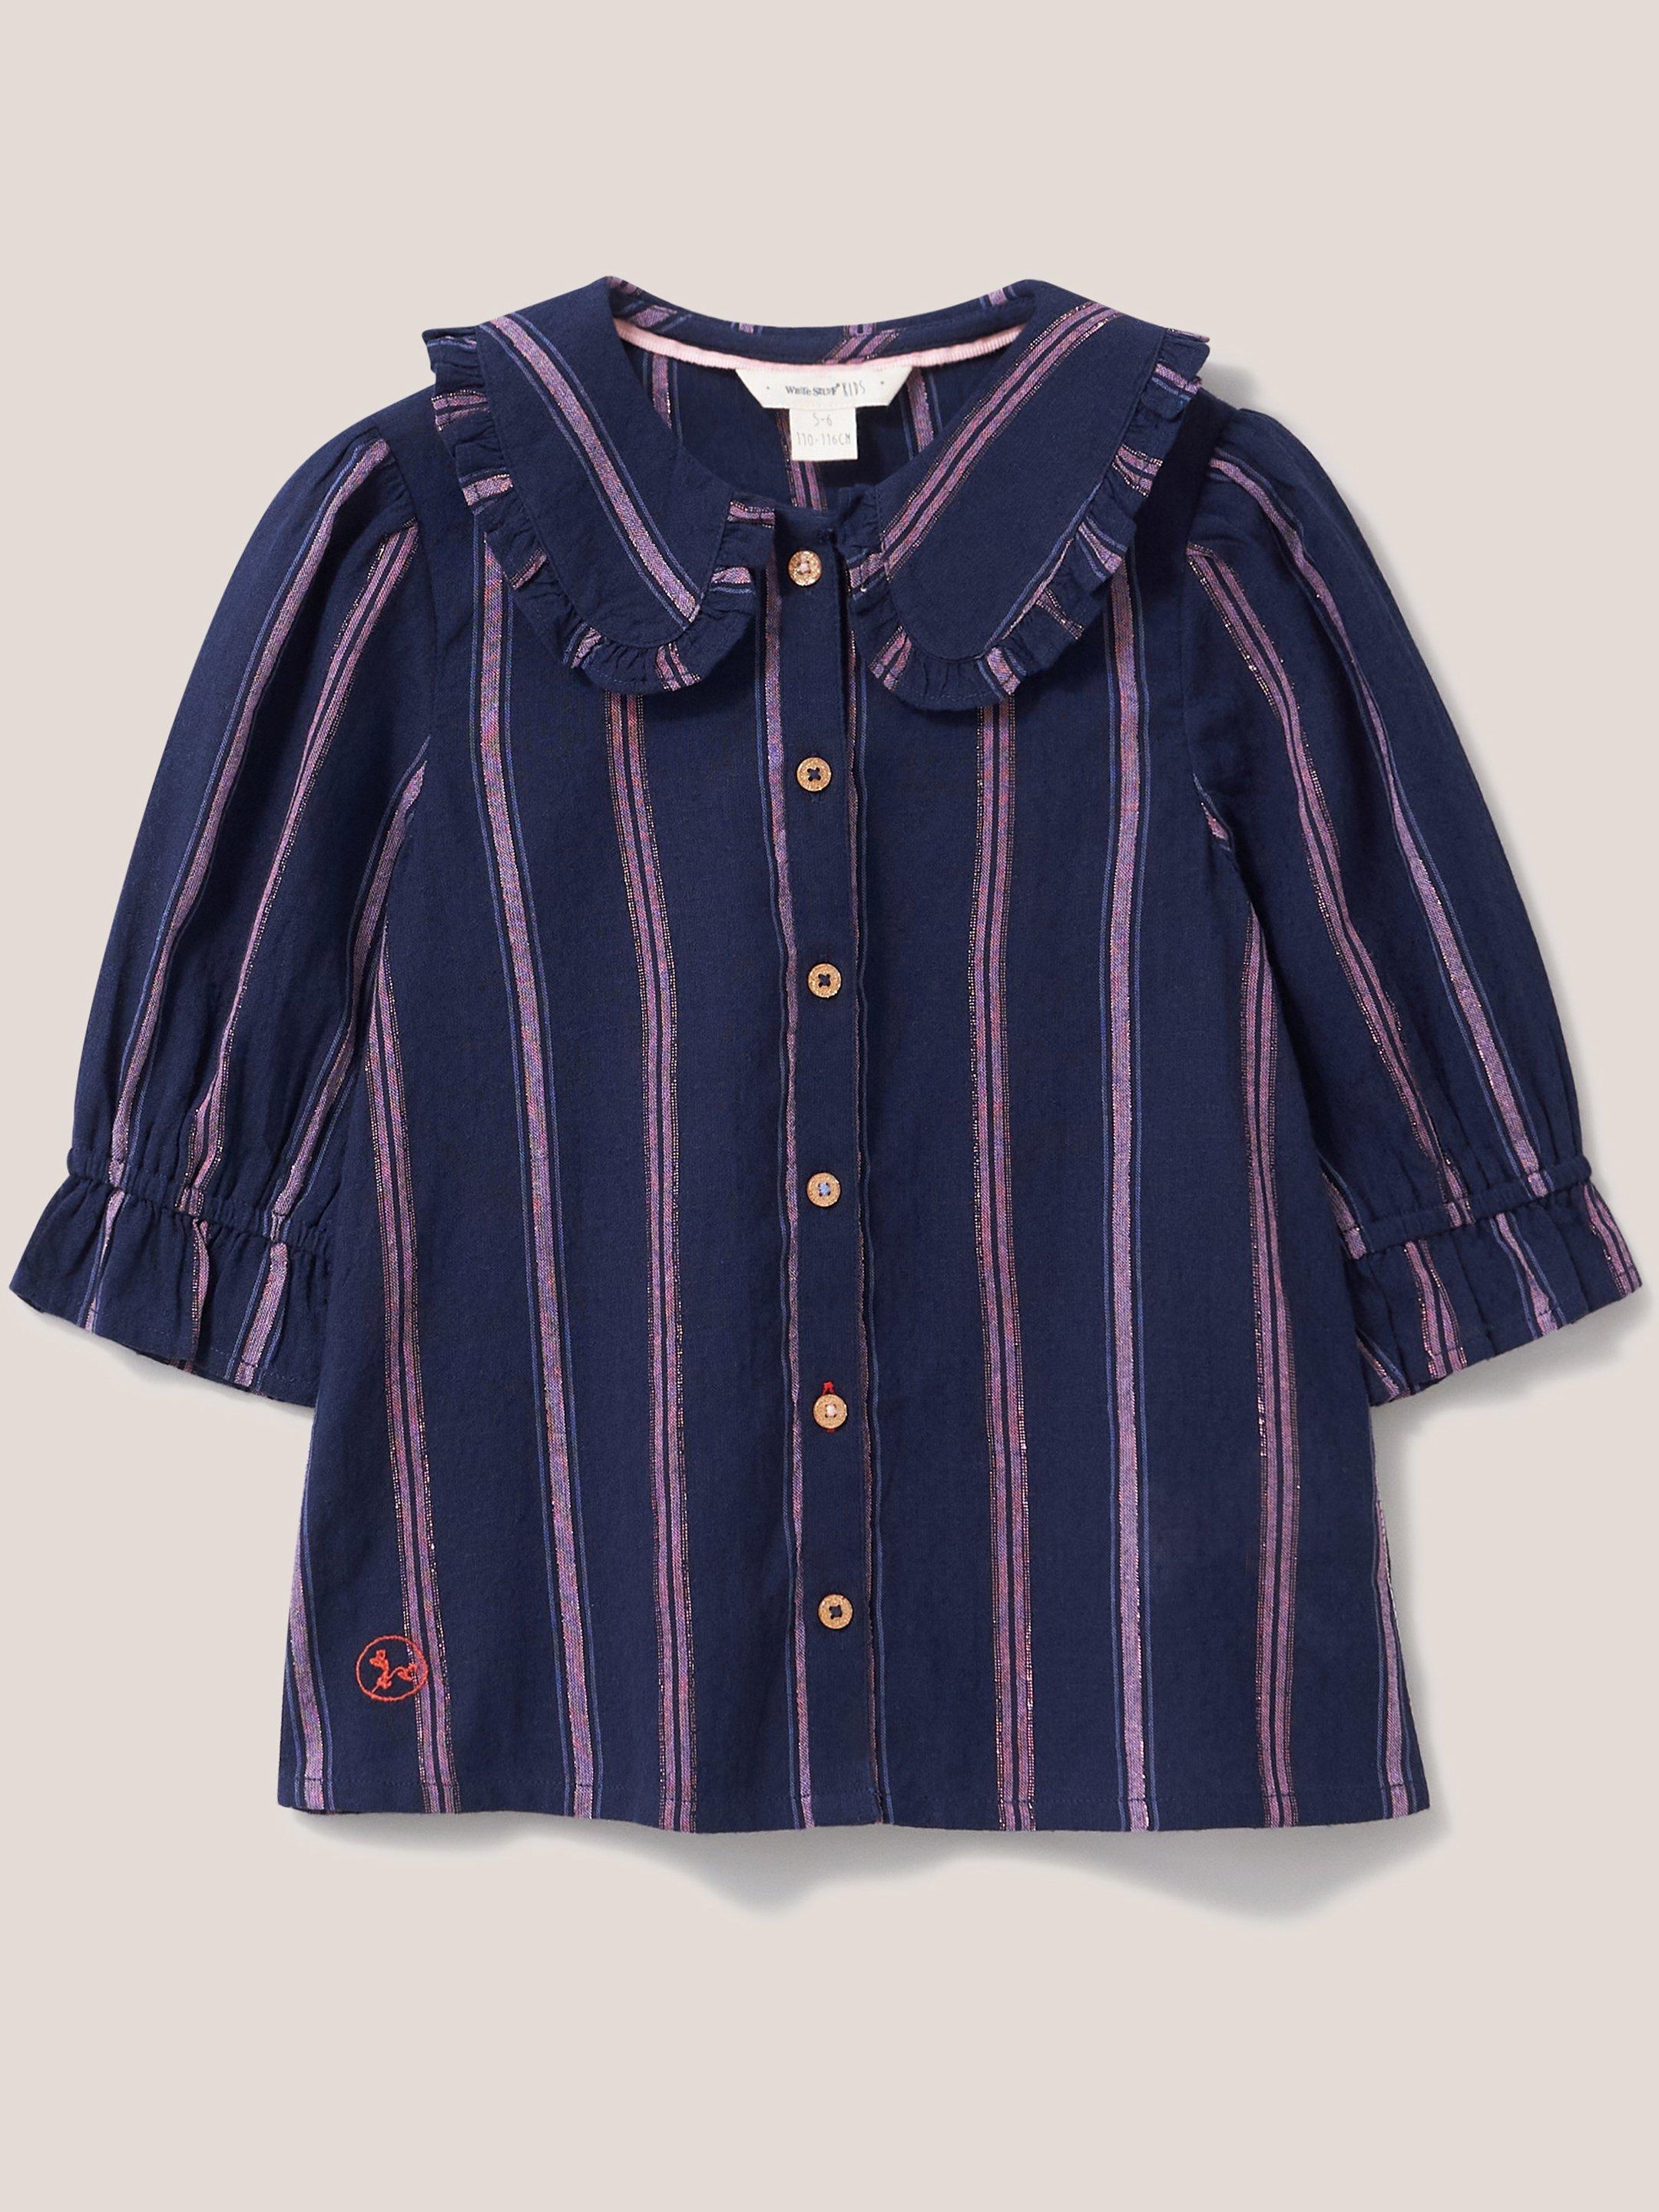 Nelly Top Kids in NAVY MULTI - FLAT FRONT